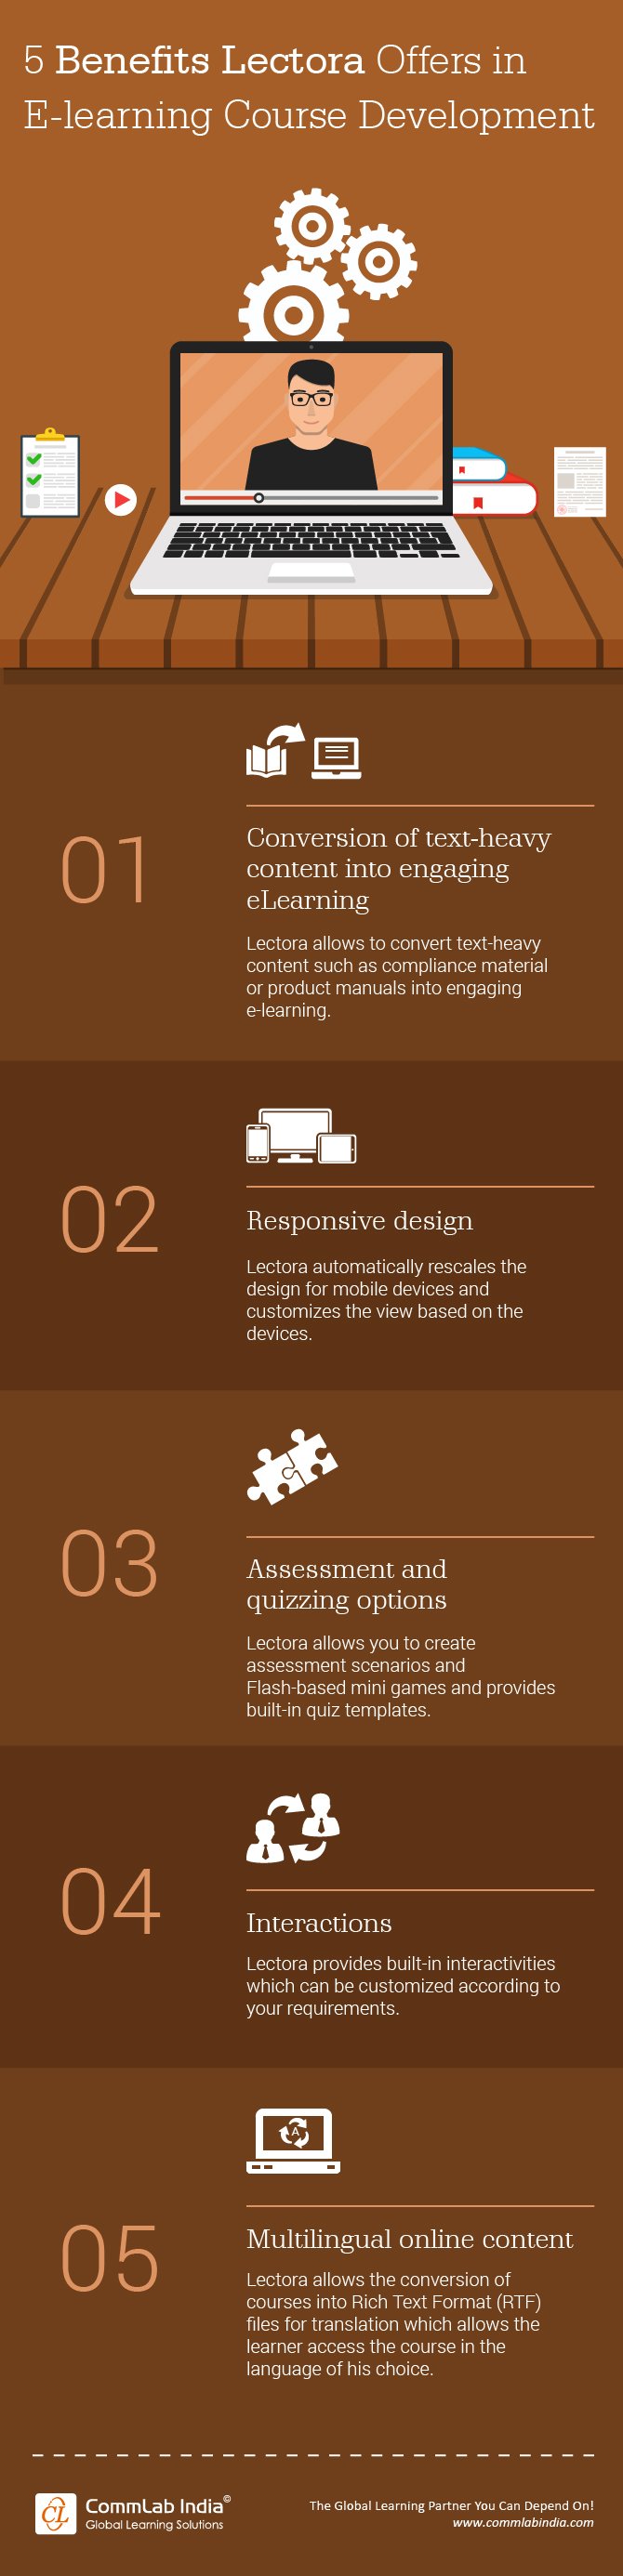 5 Benefits Lectora Offers in E-learning Course Development [Infographic]